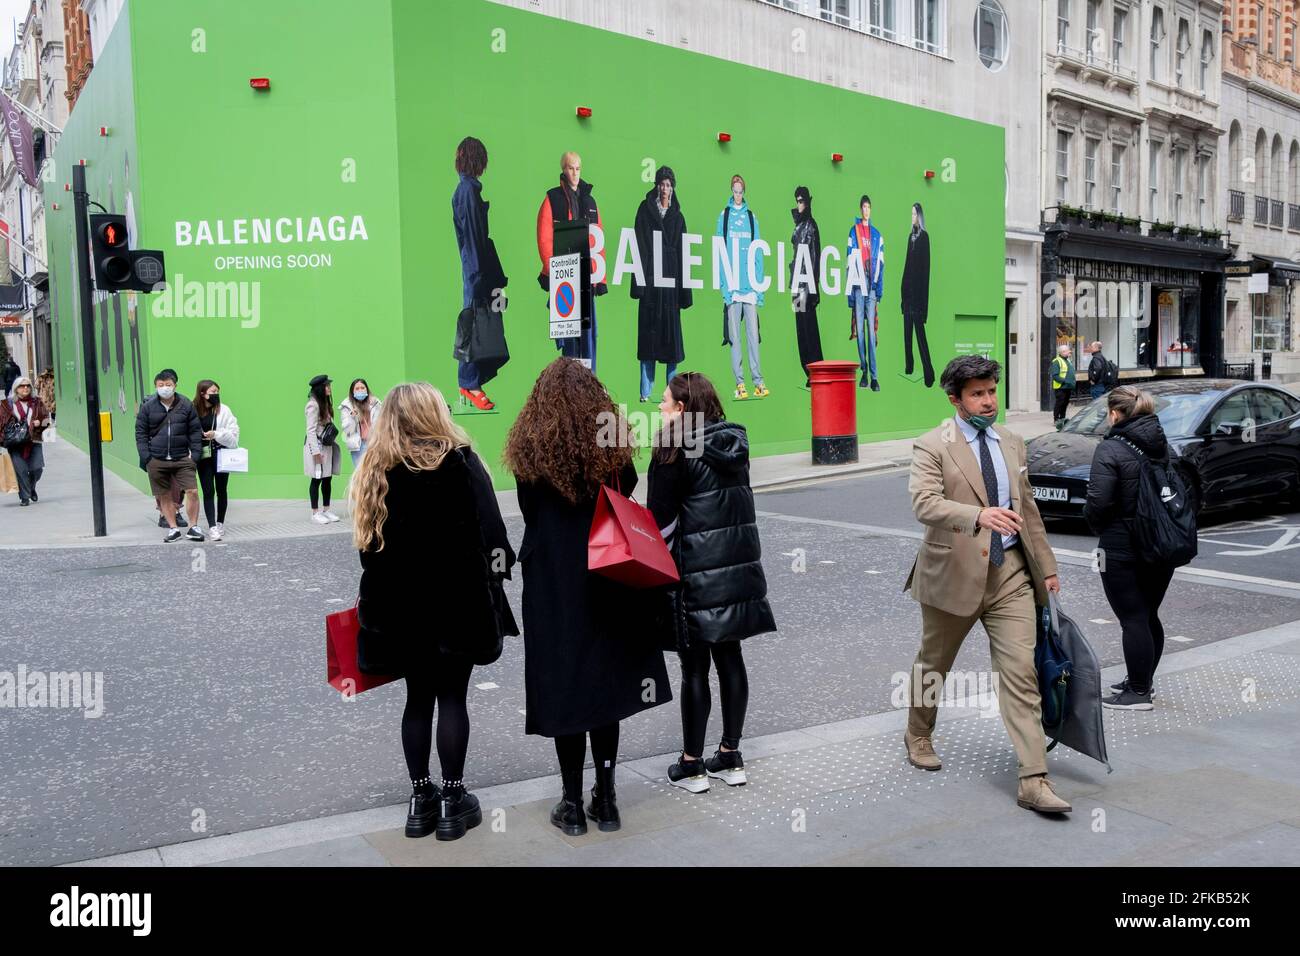 Shoppers cross the road towards the temporary hoarding for Balenciaga, a  retail space which is opening soon on Bond Street, on 27th April 2021, in  London, England. Balenciaga is a fashion house